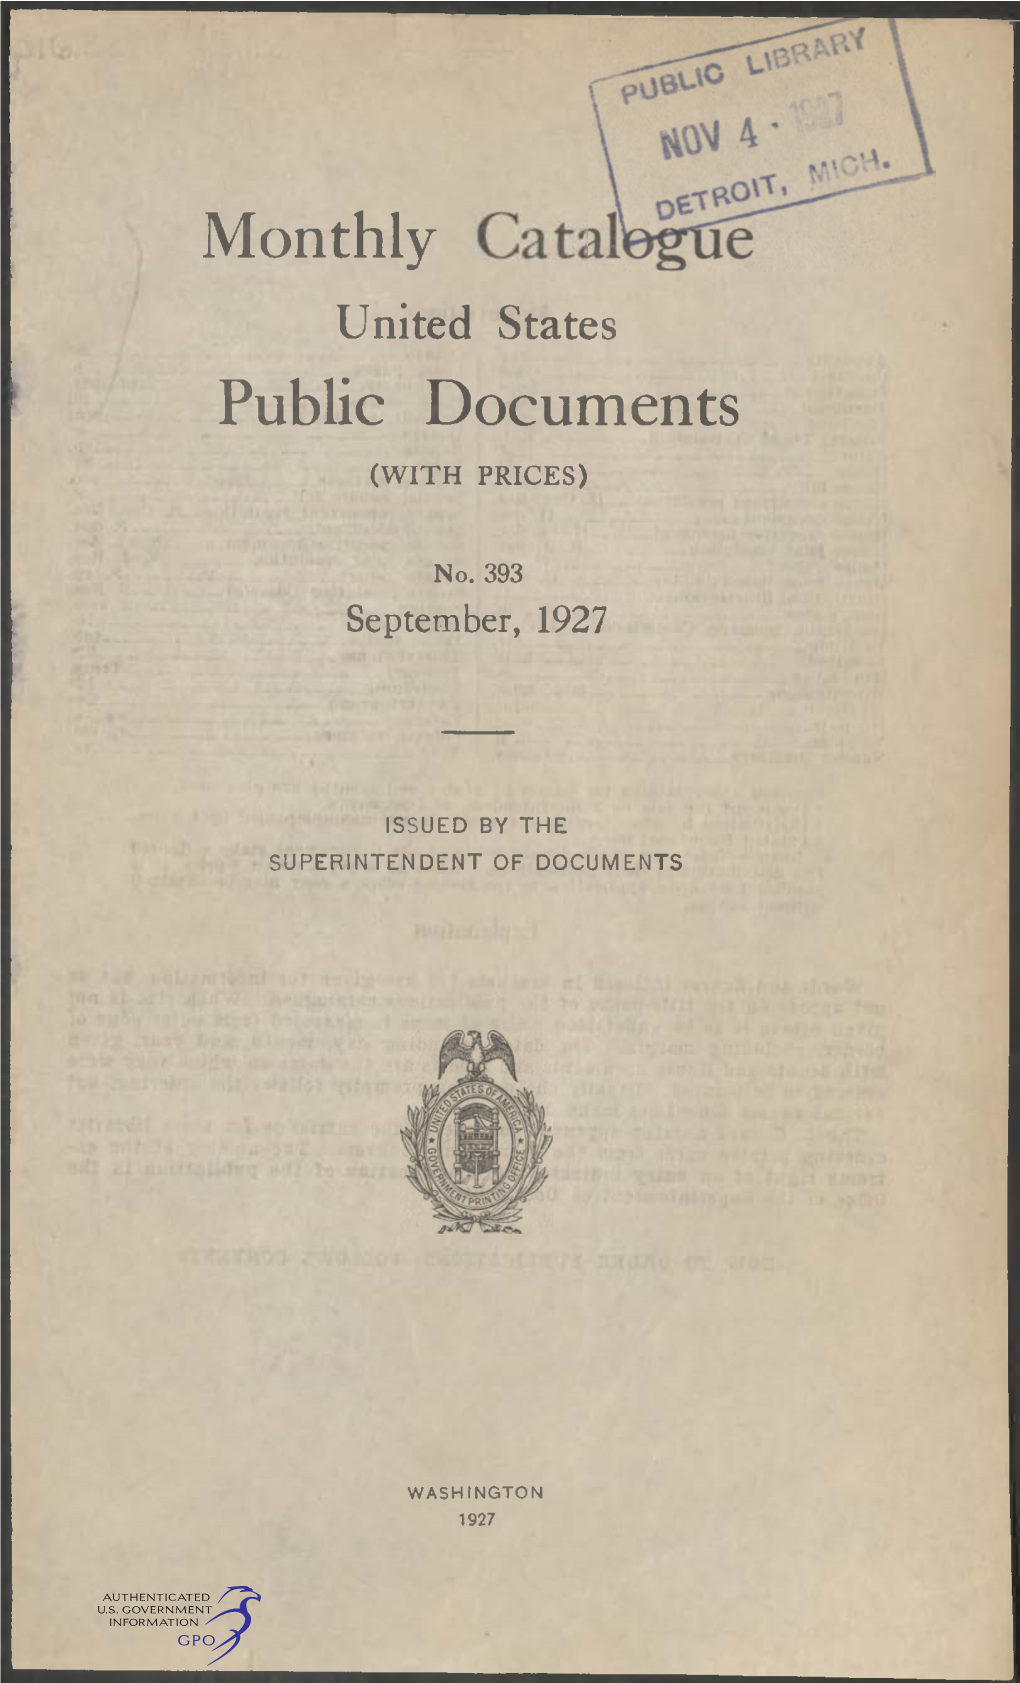 Monthly Catalogue, United States Public Documents, September 1927